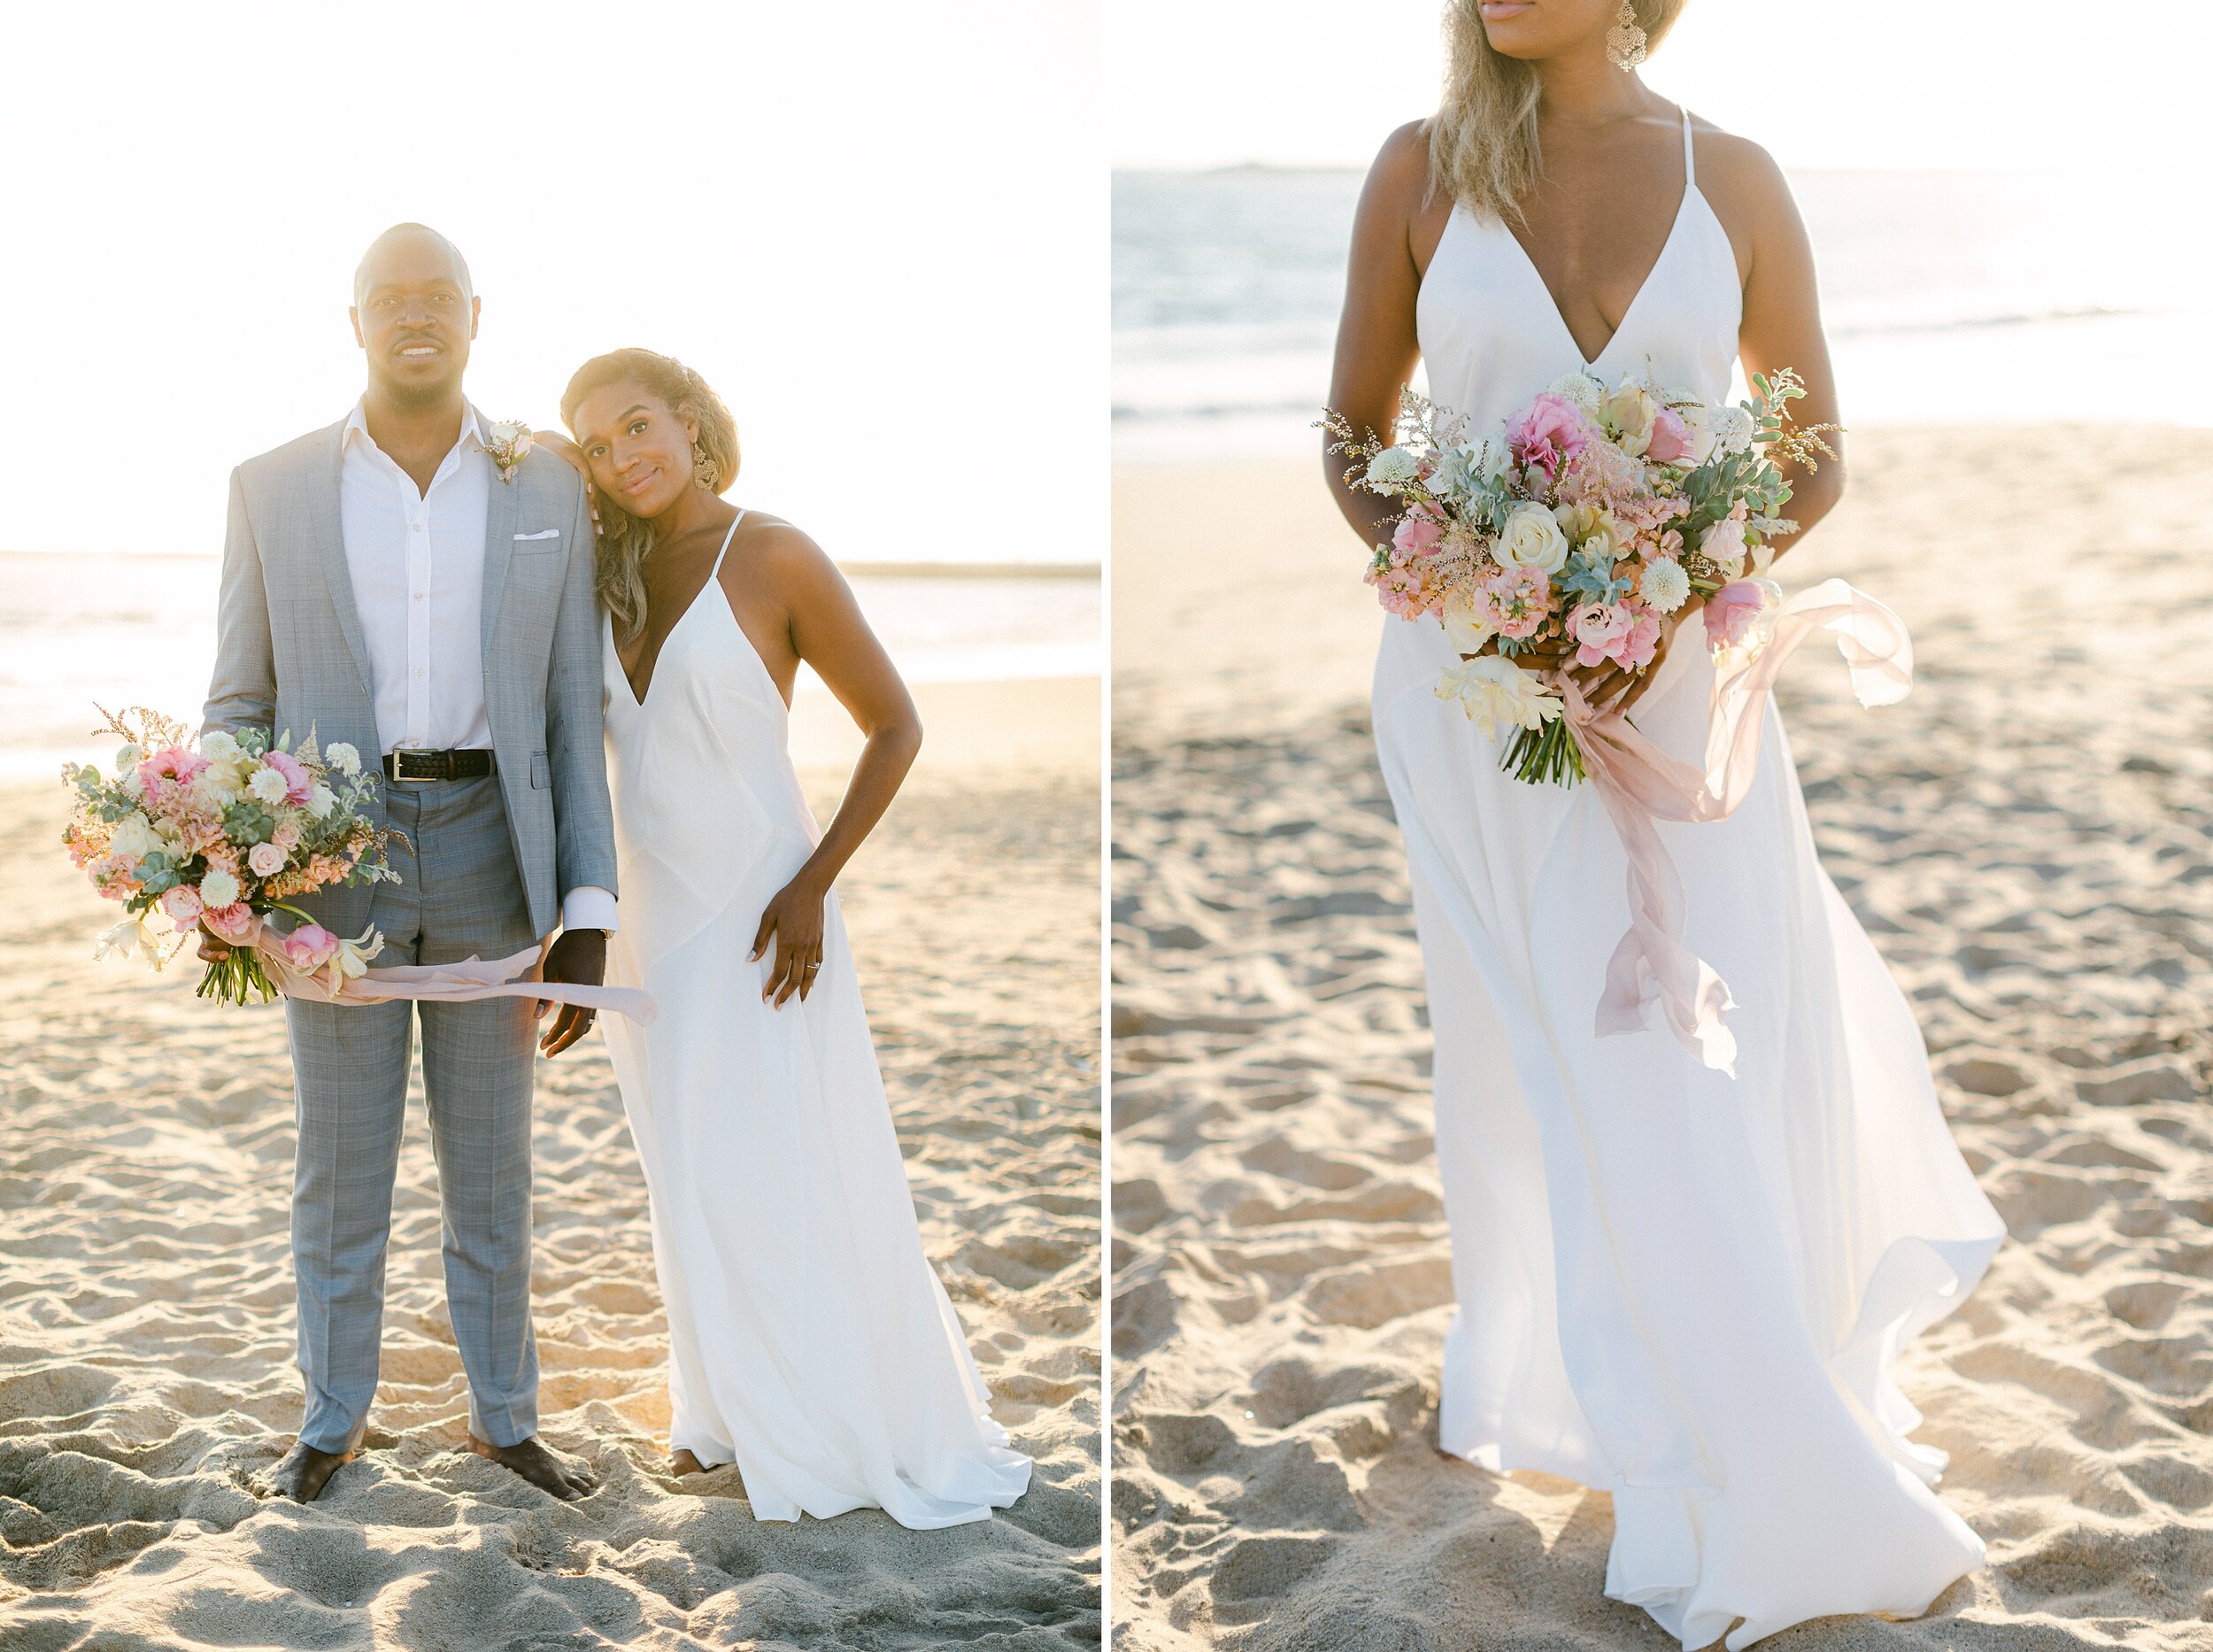 Dreamy beach elopement photos as groom holds bridal bouquet and bride rests her head on grooms shoulder.